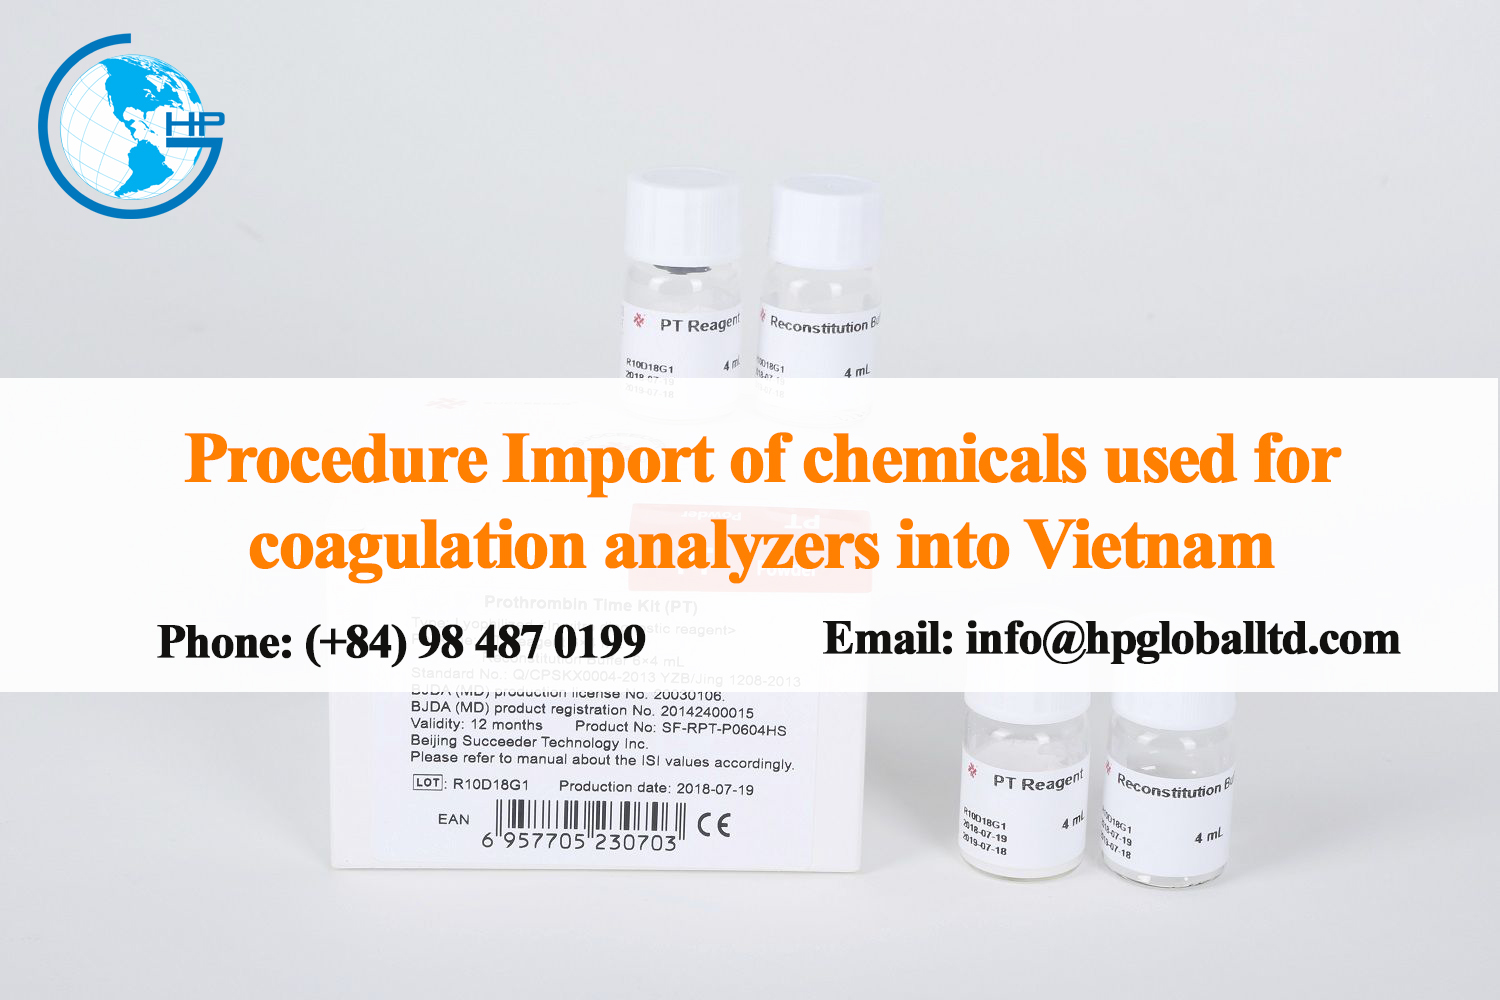 Procedure and Import duties of chemicals used for coagulation analyzers into Vietnam